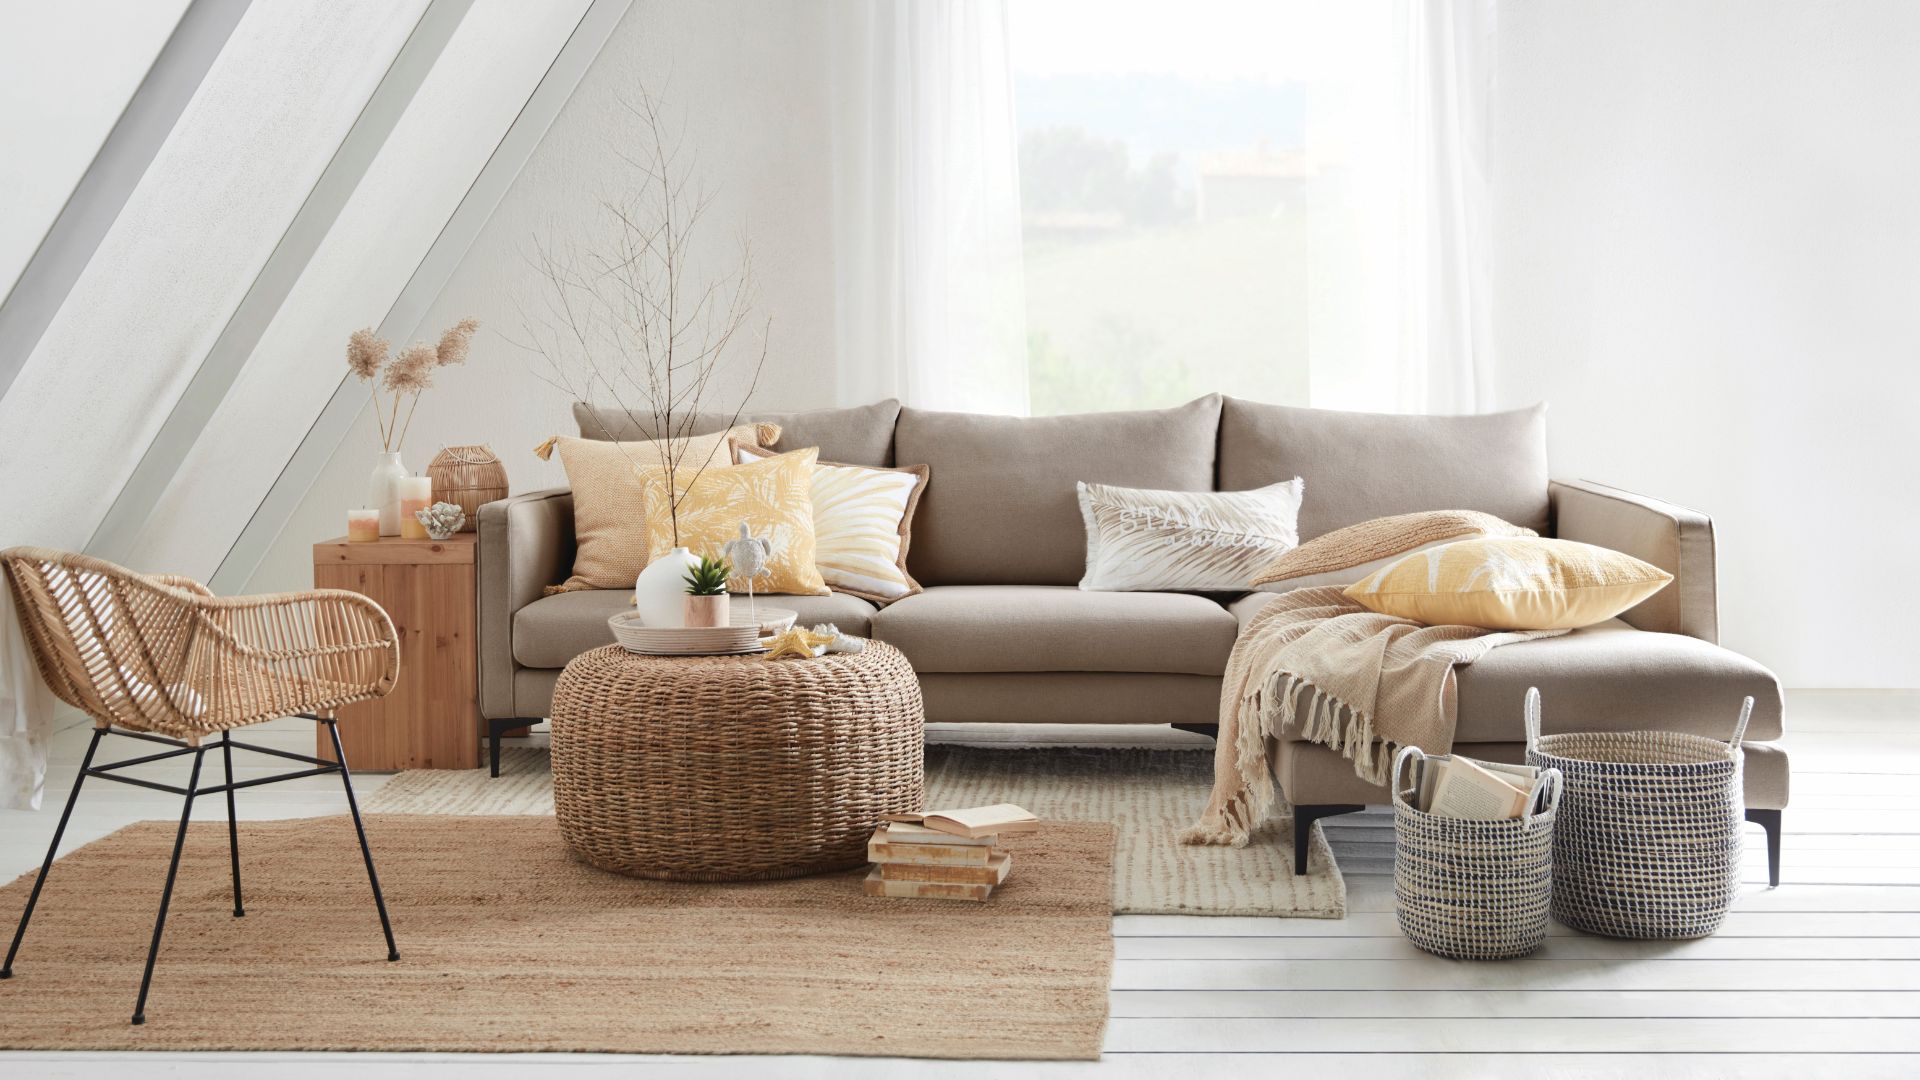 Refresh Your Space With These 5 Easy Living Room Decor Ideas